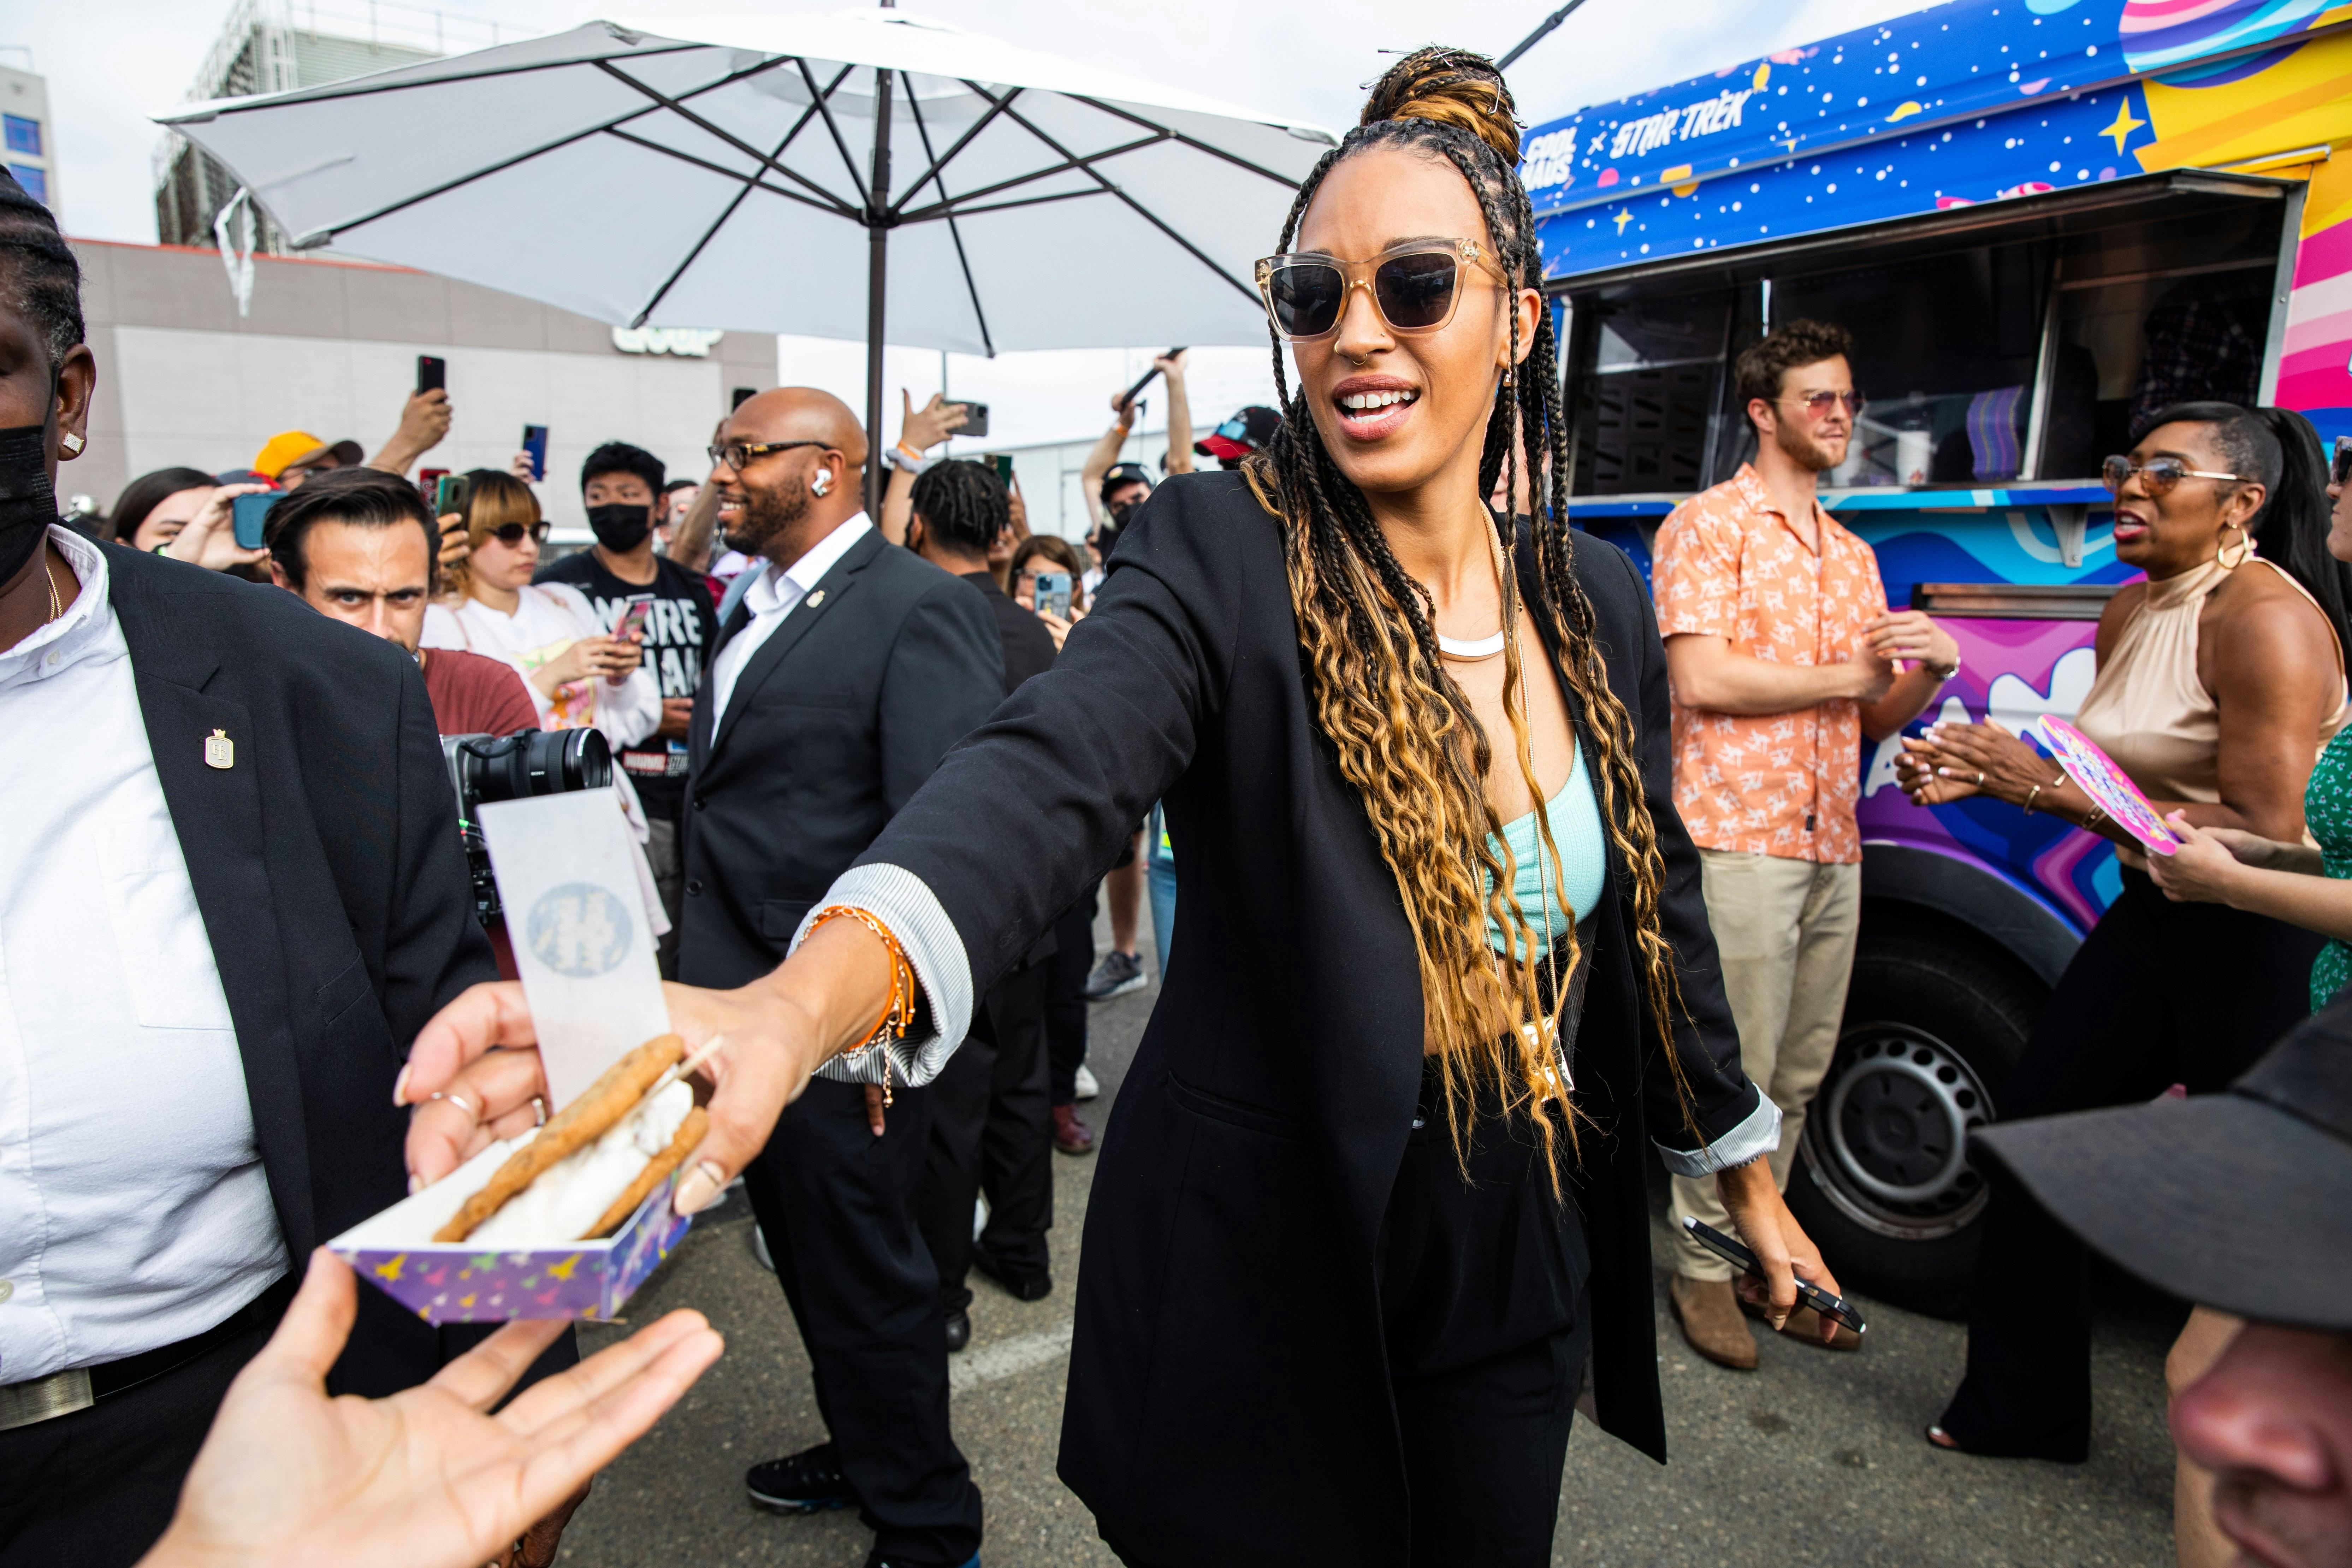 Tawny Newsome handing out ice cream at the Wrath of P'Khan ice cream truck at SDCC 2022